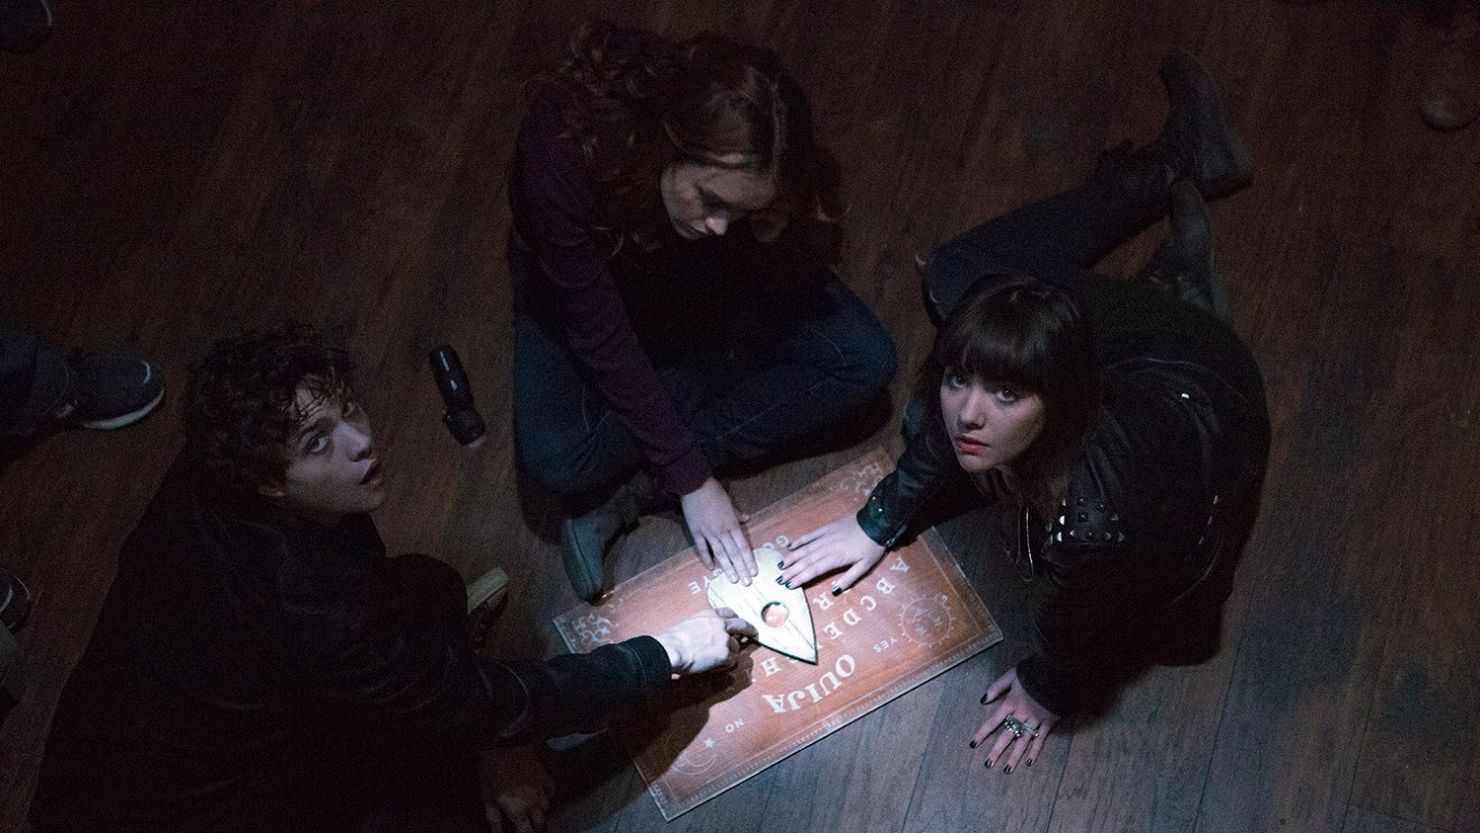 The horror movie "Ouija" stars actors Douglas Smith, from left, Ana Coto and Olivia Cooke.